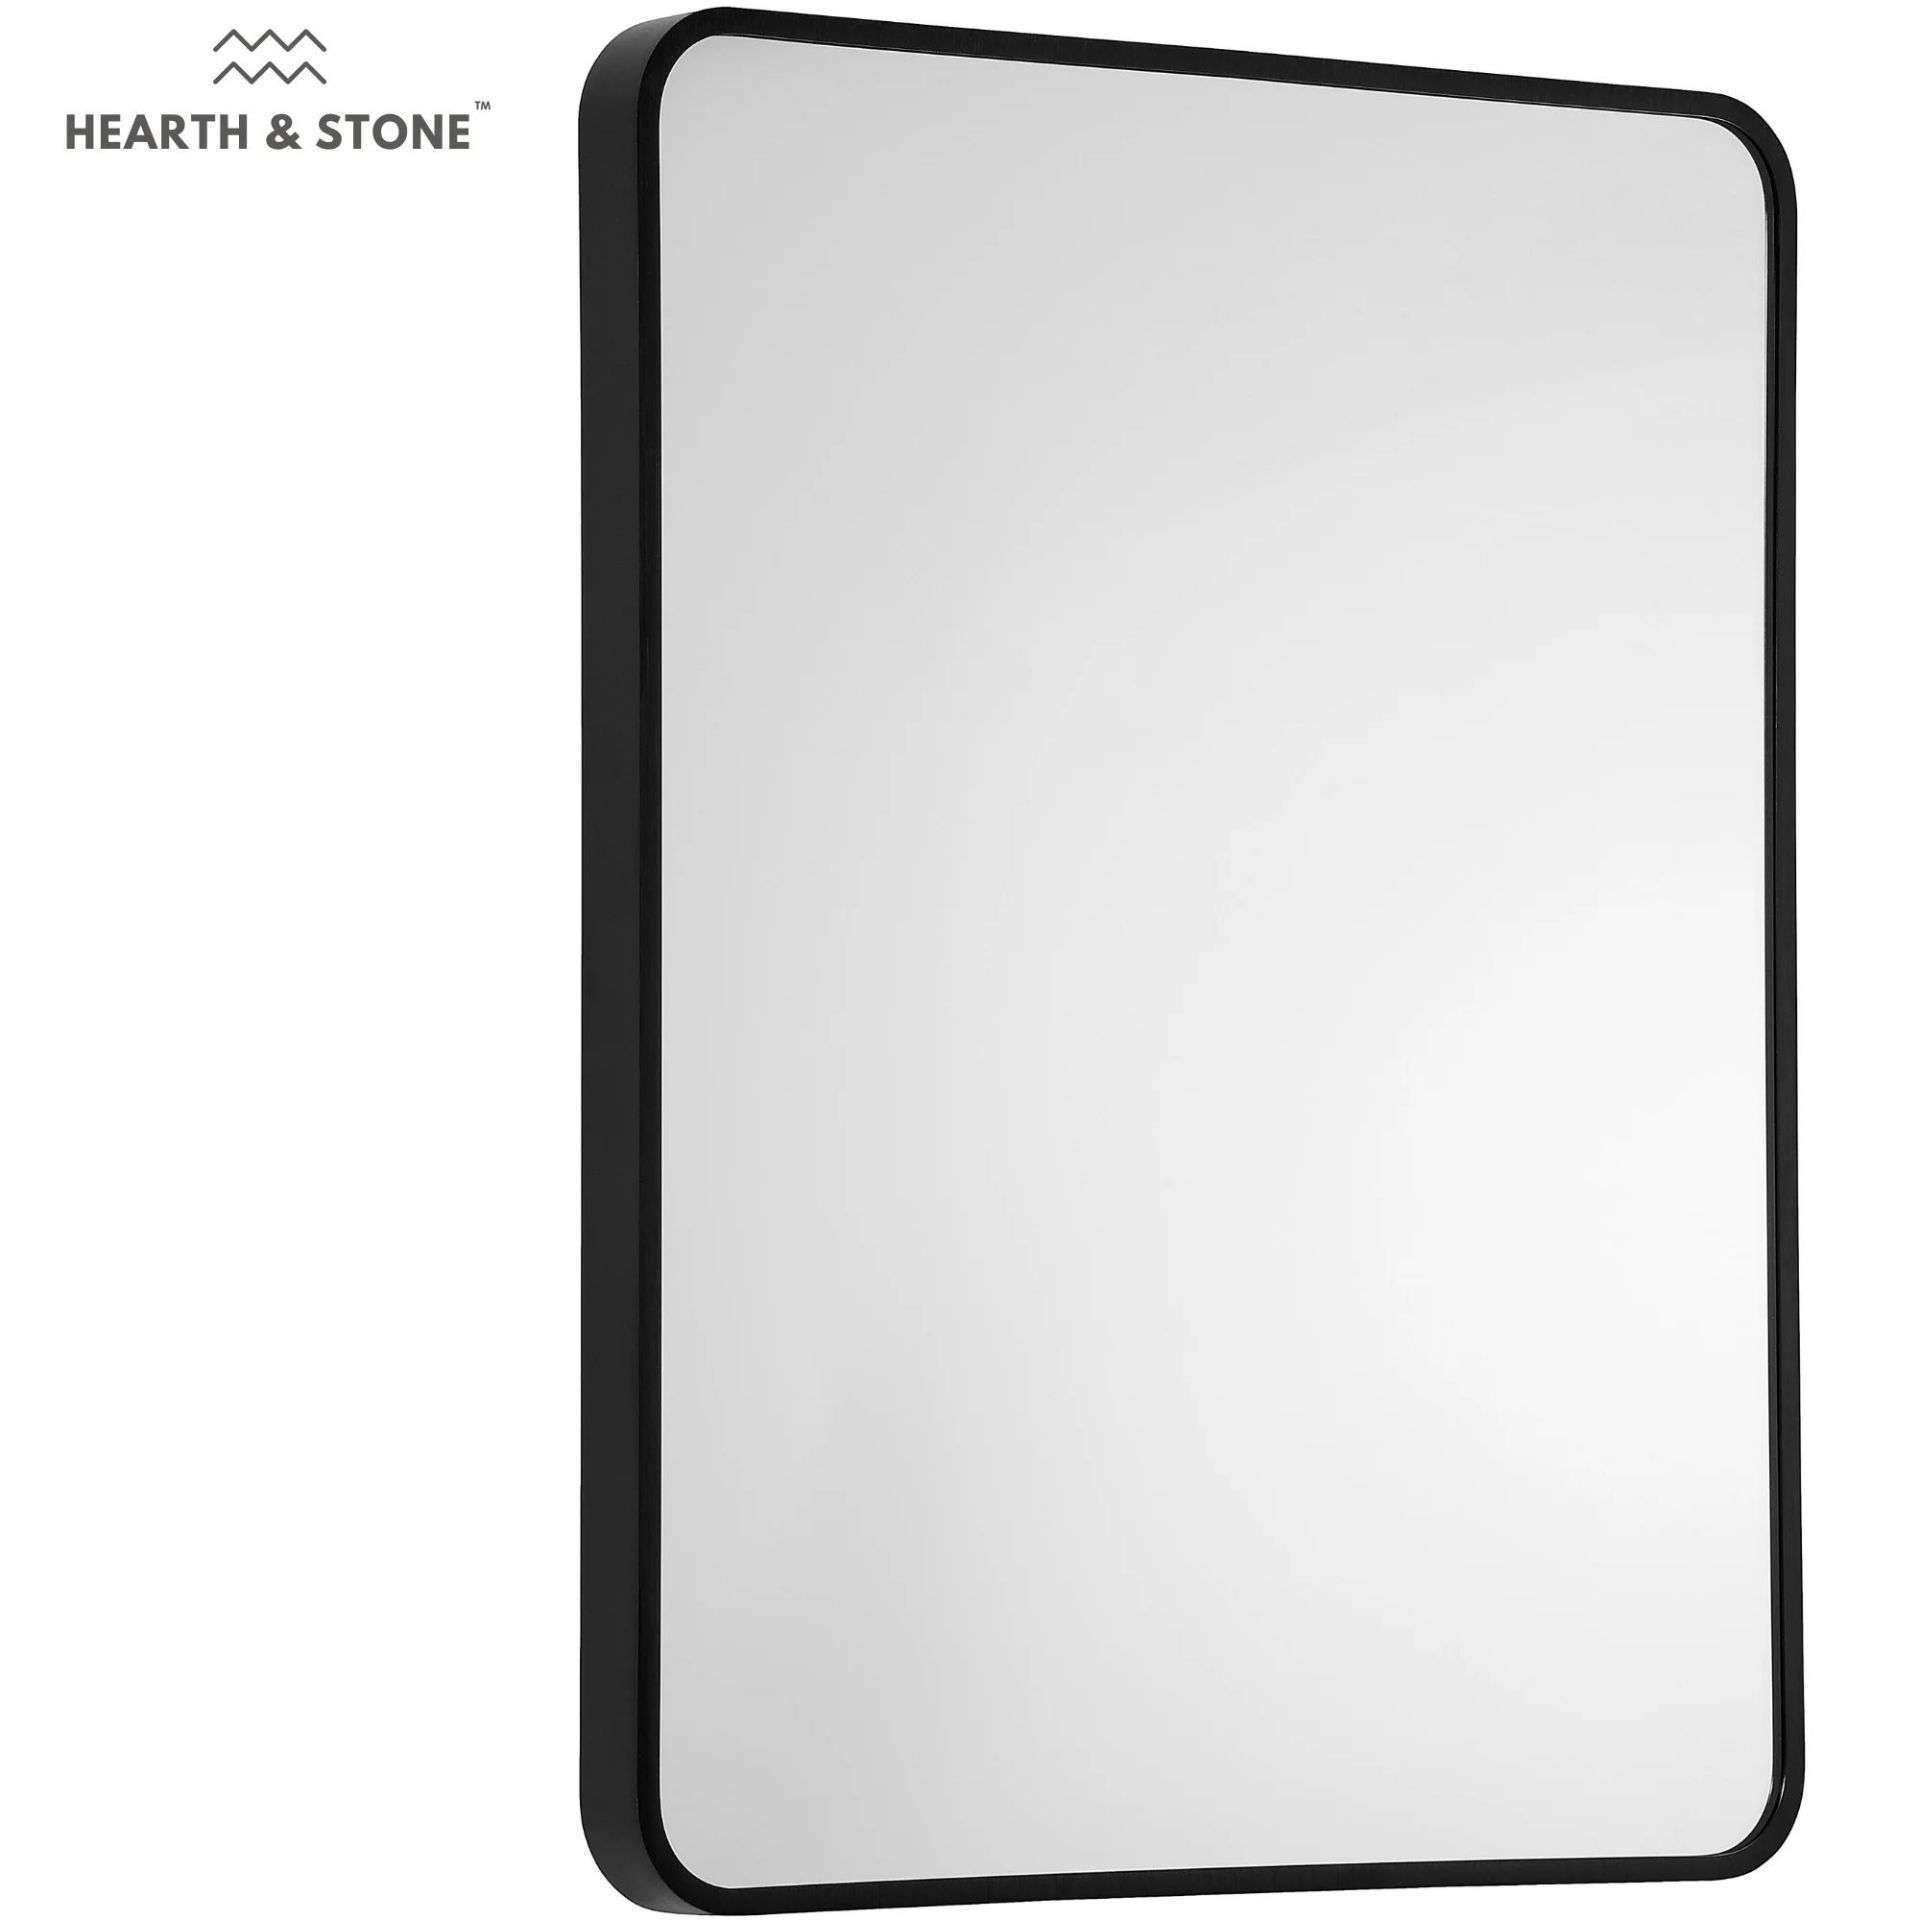 BRAND NEW HEARTH AND STONE LUXURY BLACK FRAMED MIRROR RRP £199 R7.3